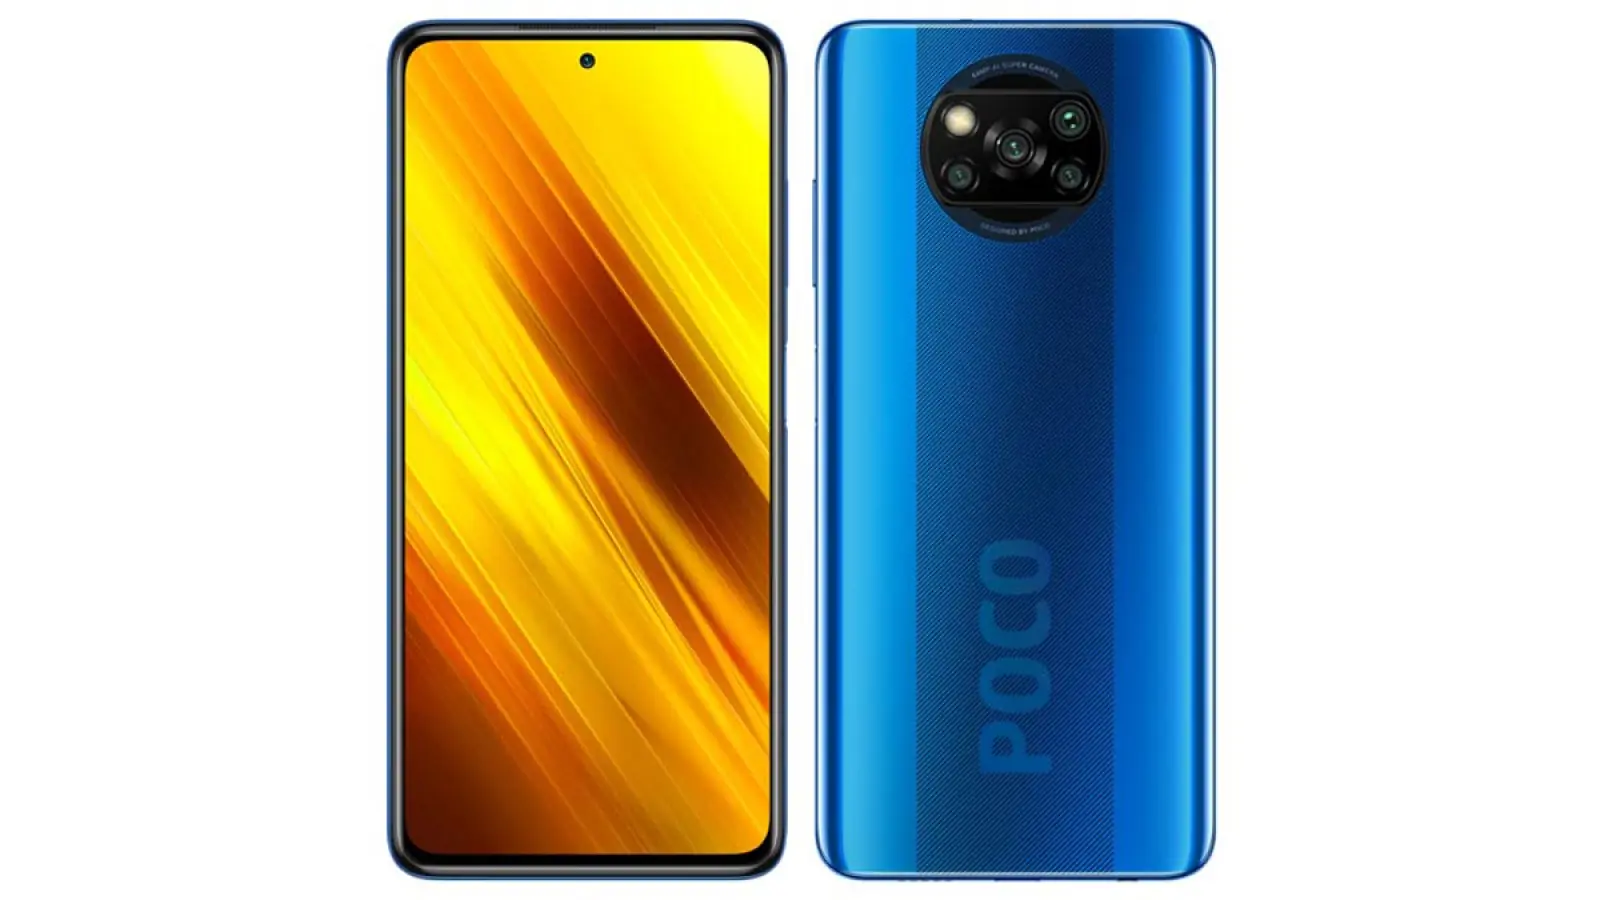 POCO smartphone will come soon with 90W fast charging, 64MP camera and 12GB RAM, know important details here